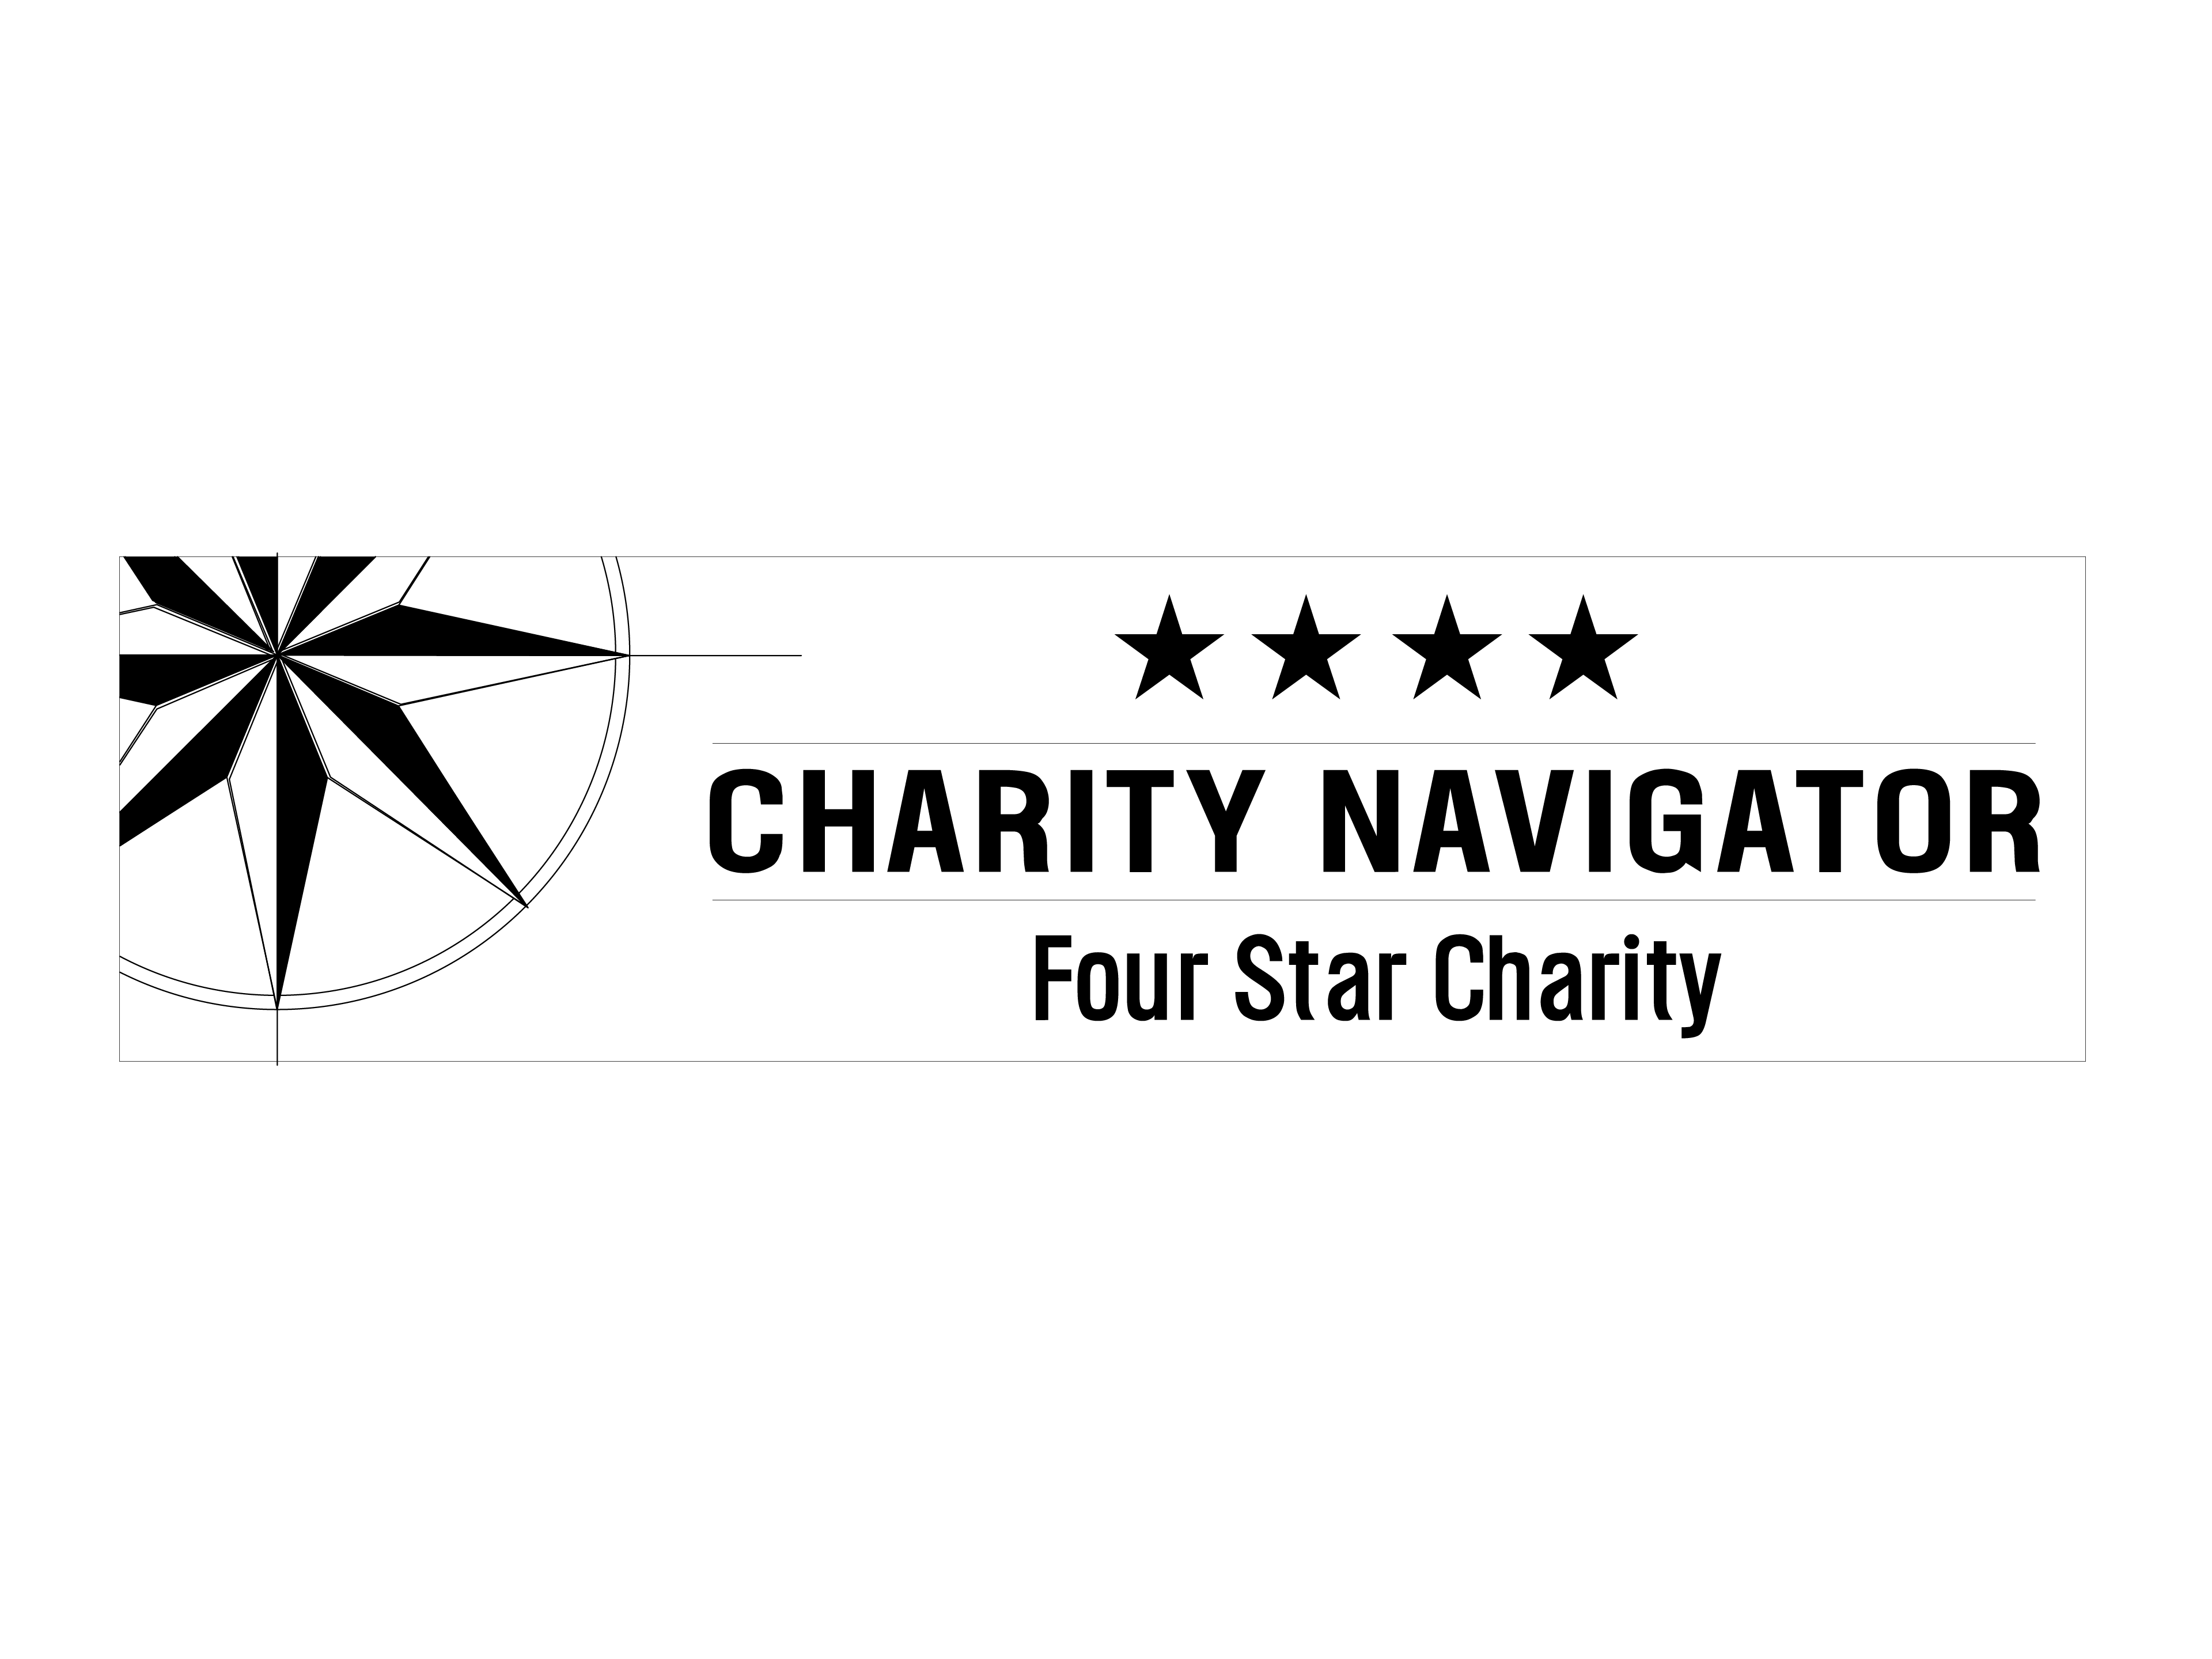 American Committee Again Receives Highest Rating from Charity Navigator